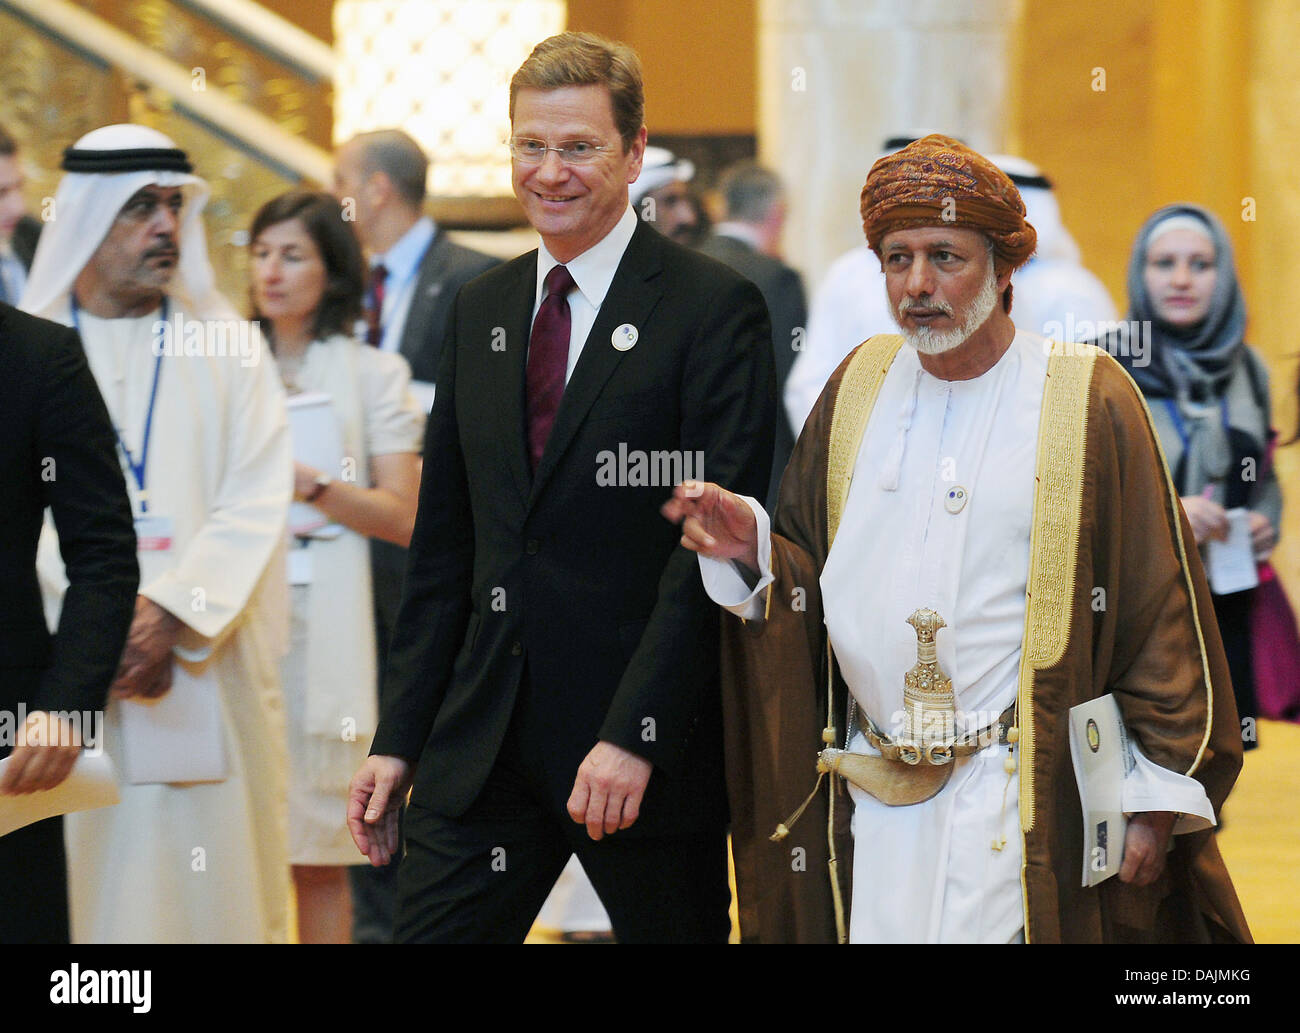 German Foreign Minister Guido Westerwelle  and State Secretary in the Federal Ministry for Foreign Affairs of the United Arab Emirates Anbar Al Gargash (R) walk to a group photo during the EU meeting with the Gulf Cooperation Council at the Emirates Palace Hotel in Abu Dhabi, United Arab Emirates, 20 April 2011. Photo: HANNIBAL Stock Photo